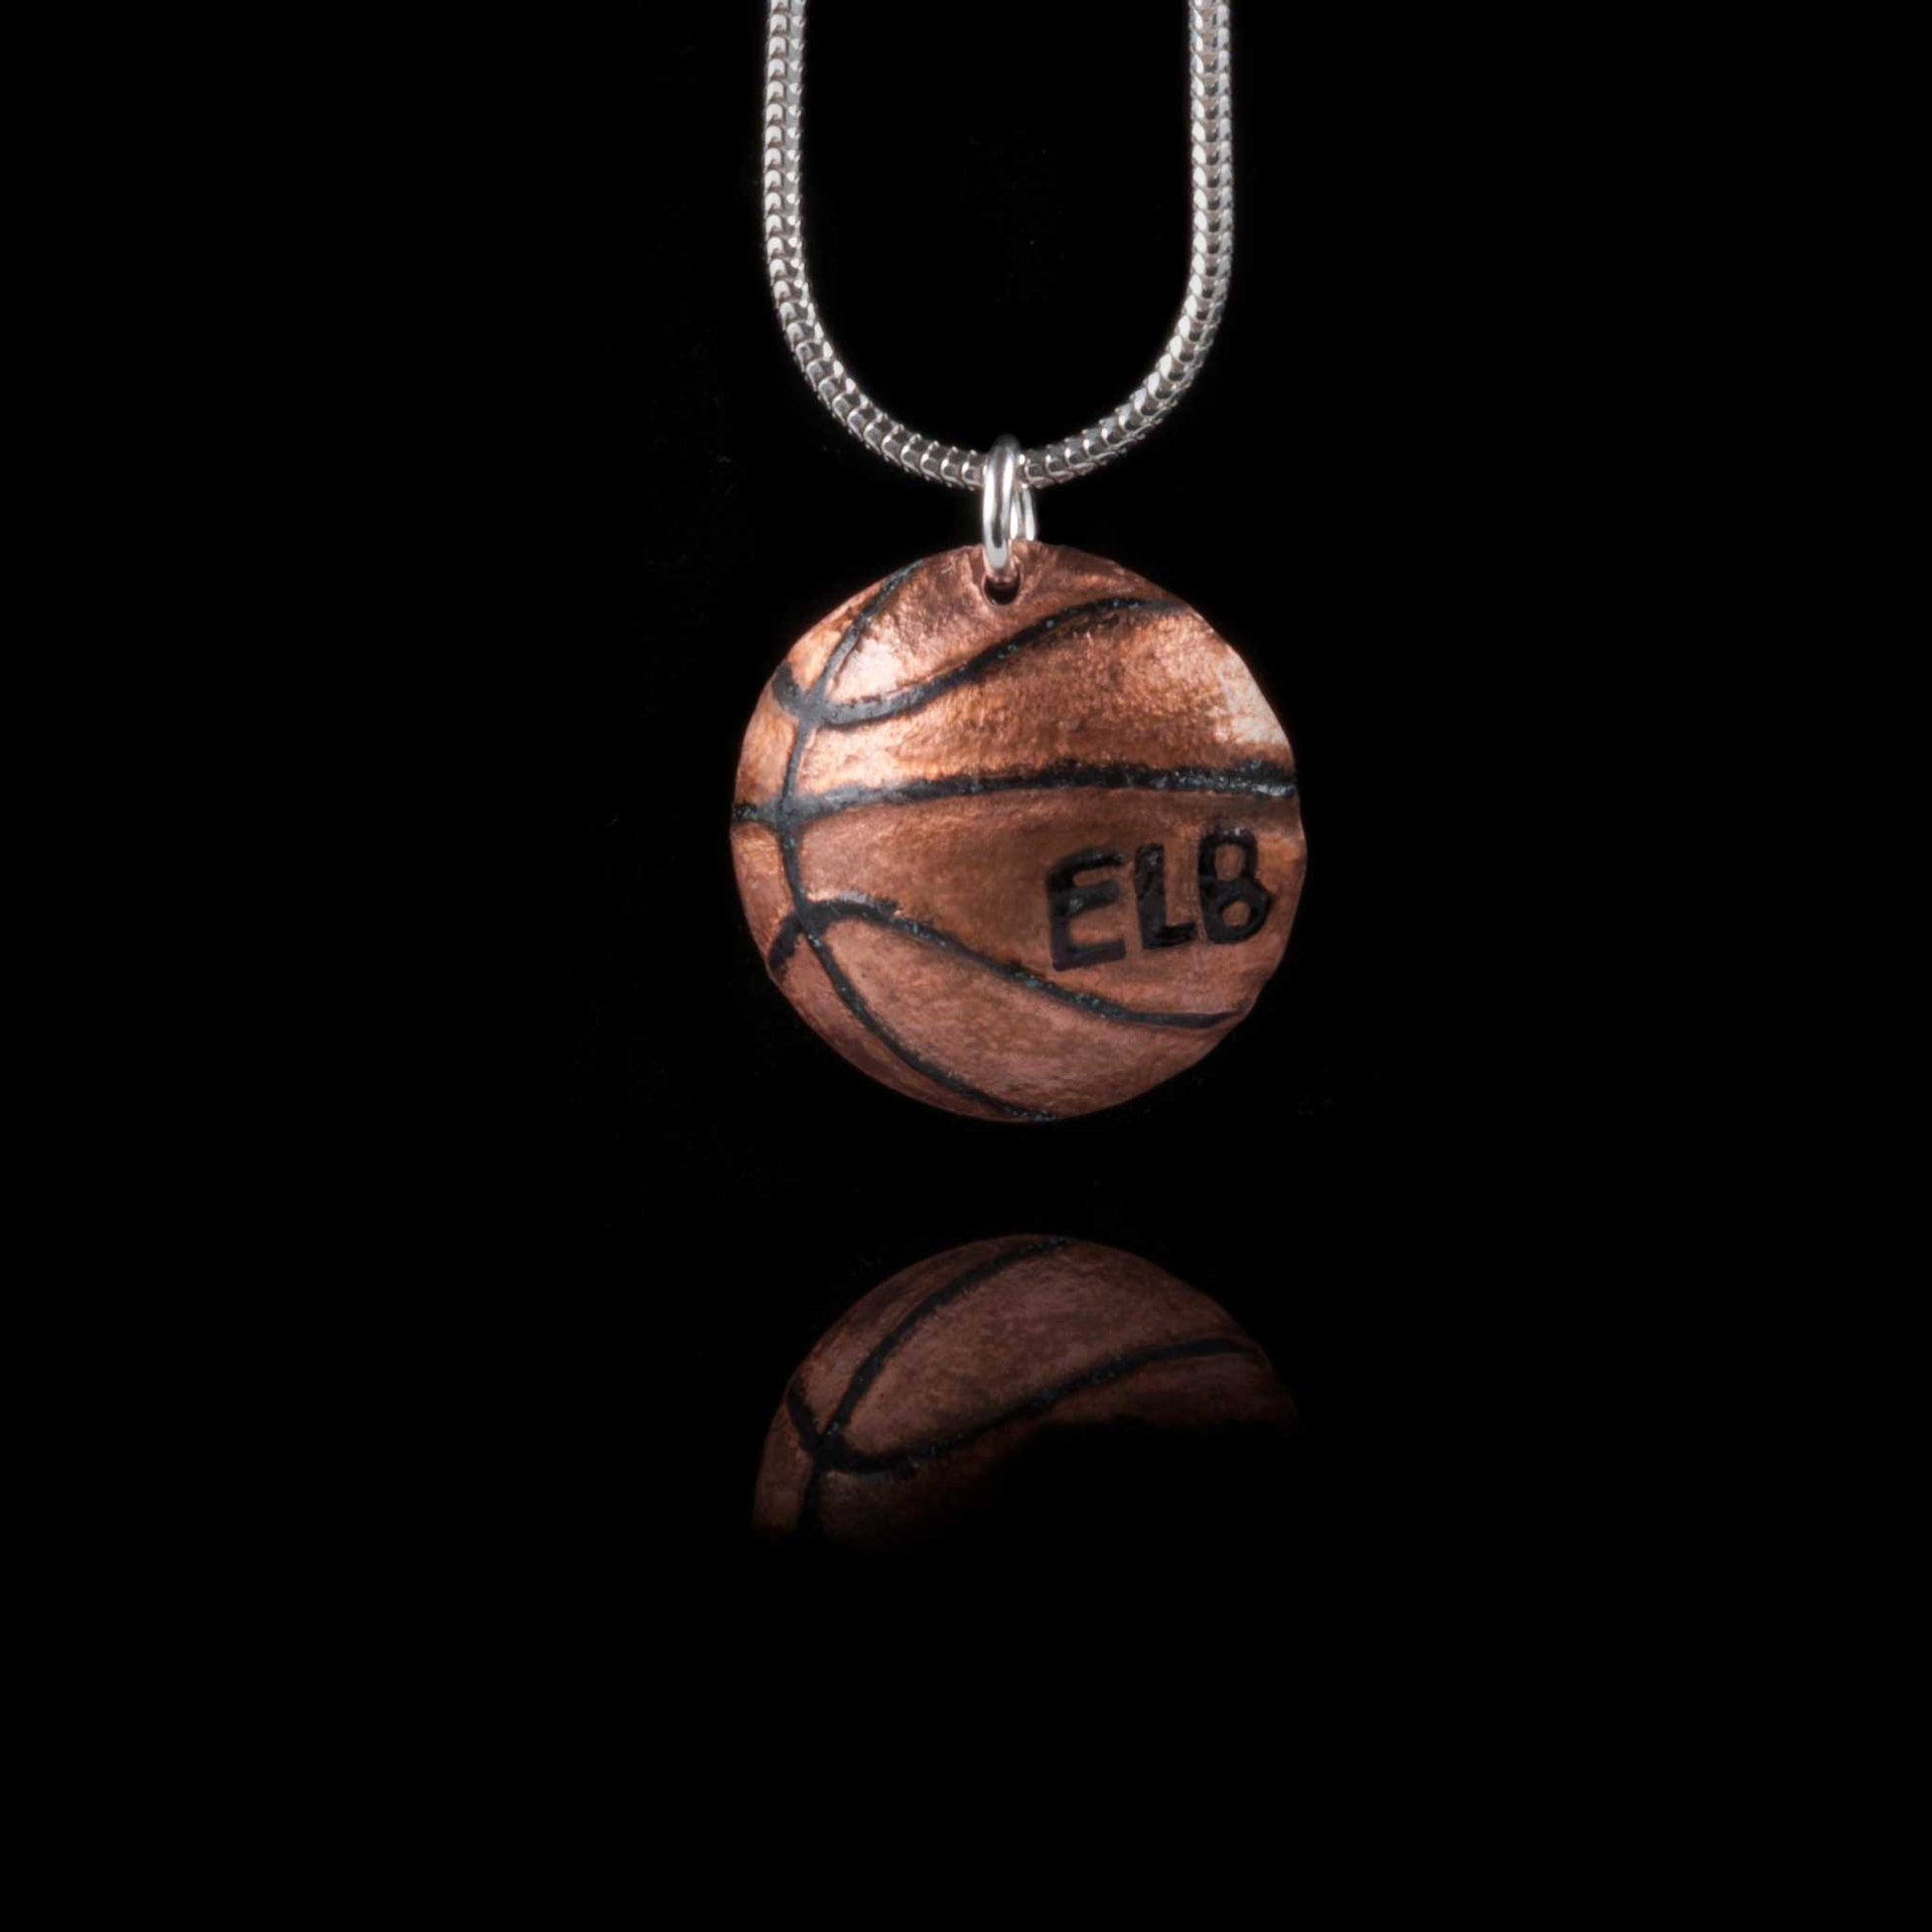 A basketball necklace on a silver chain